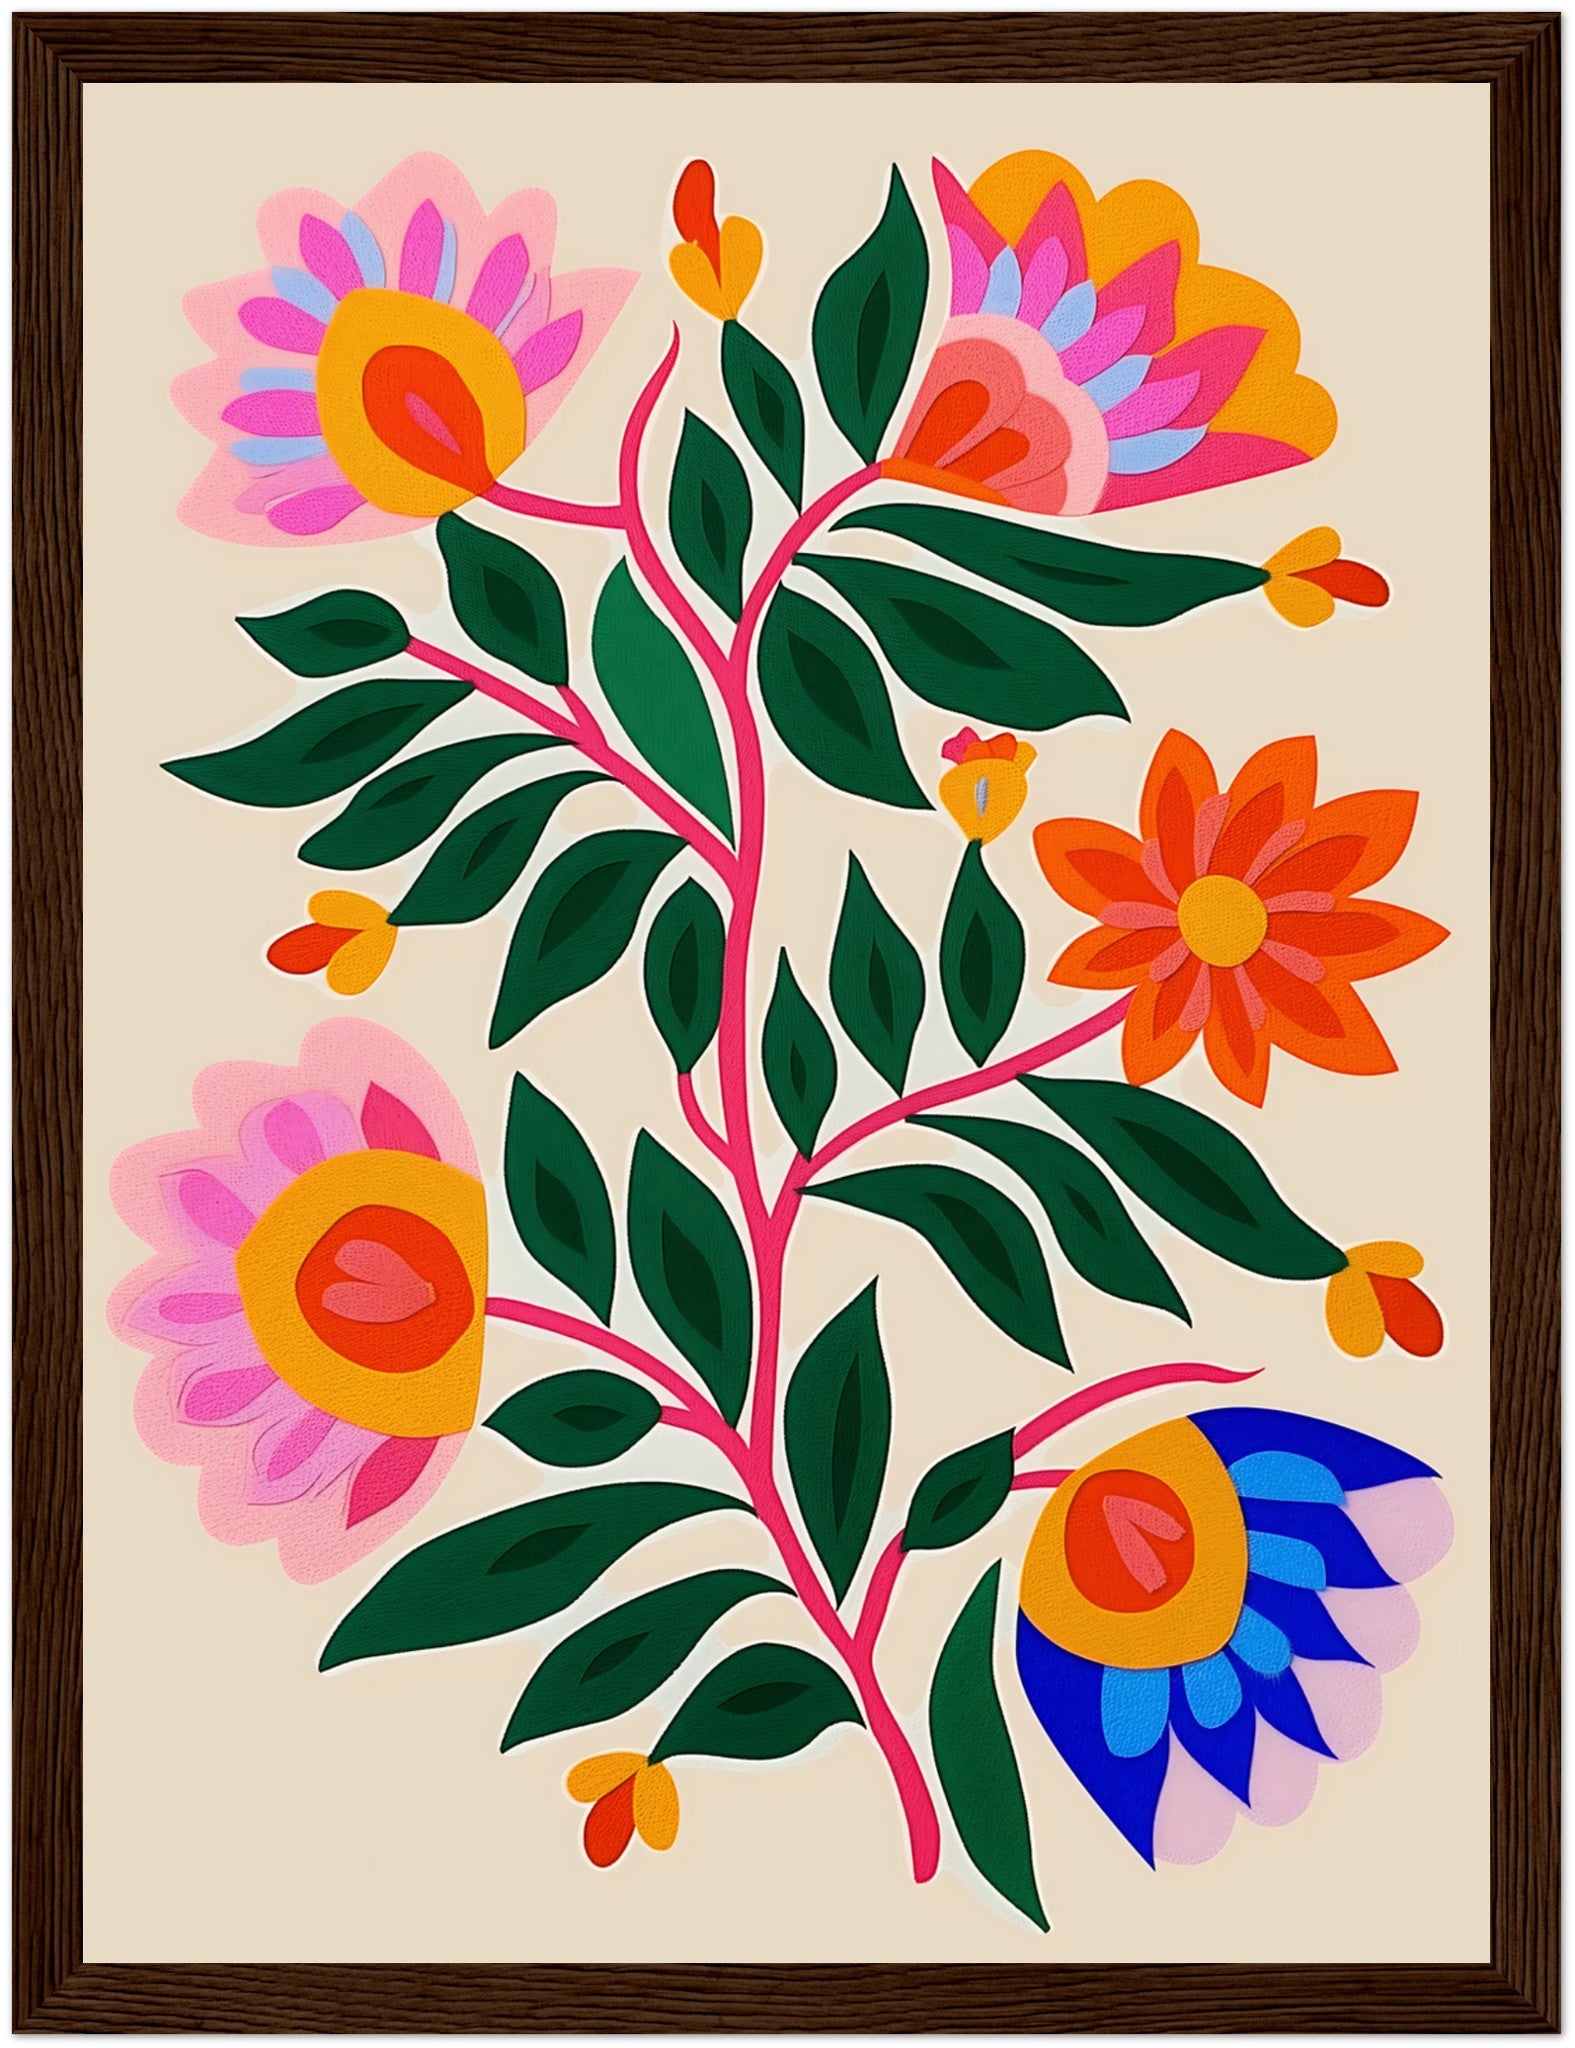 Colorful stylized floral art with pink, orange, and blue flowers on a light background, framed.